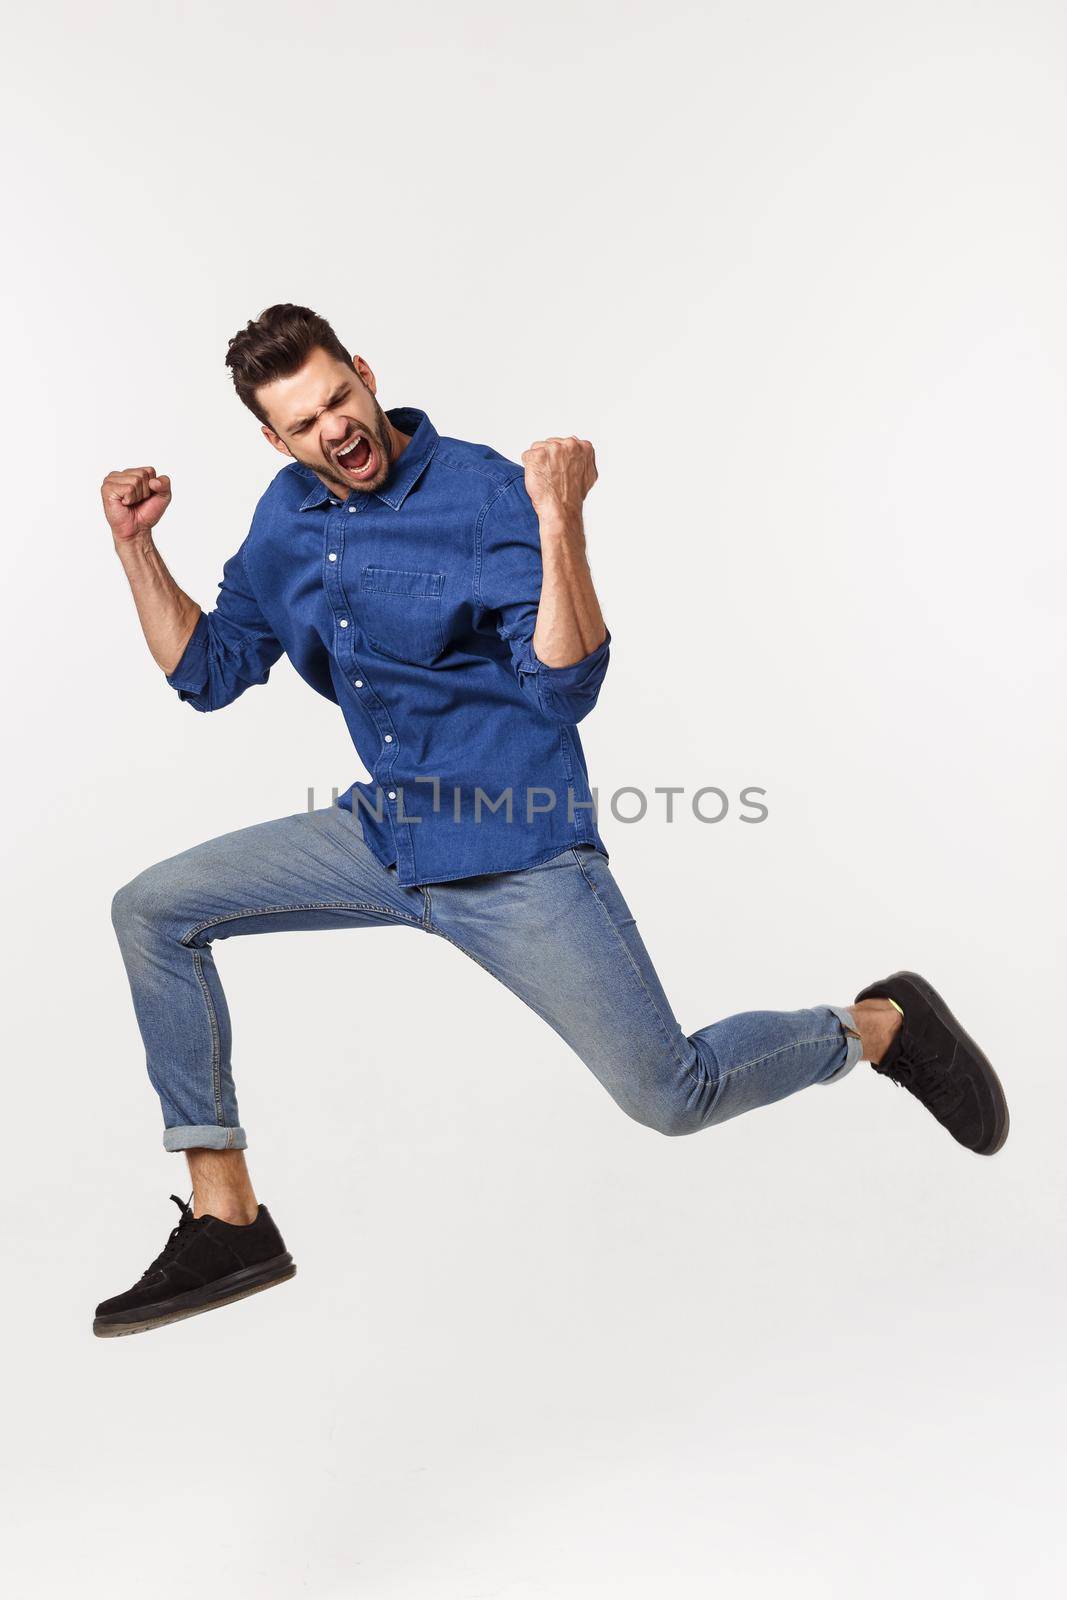 An attractive athletic businessman jumping up against white background.